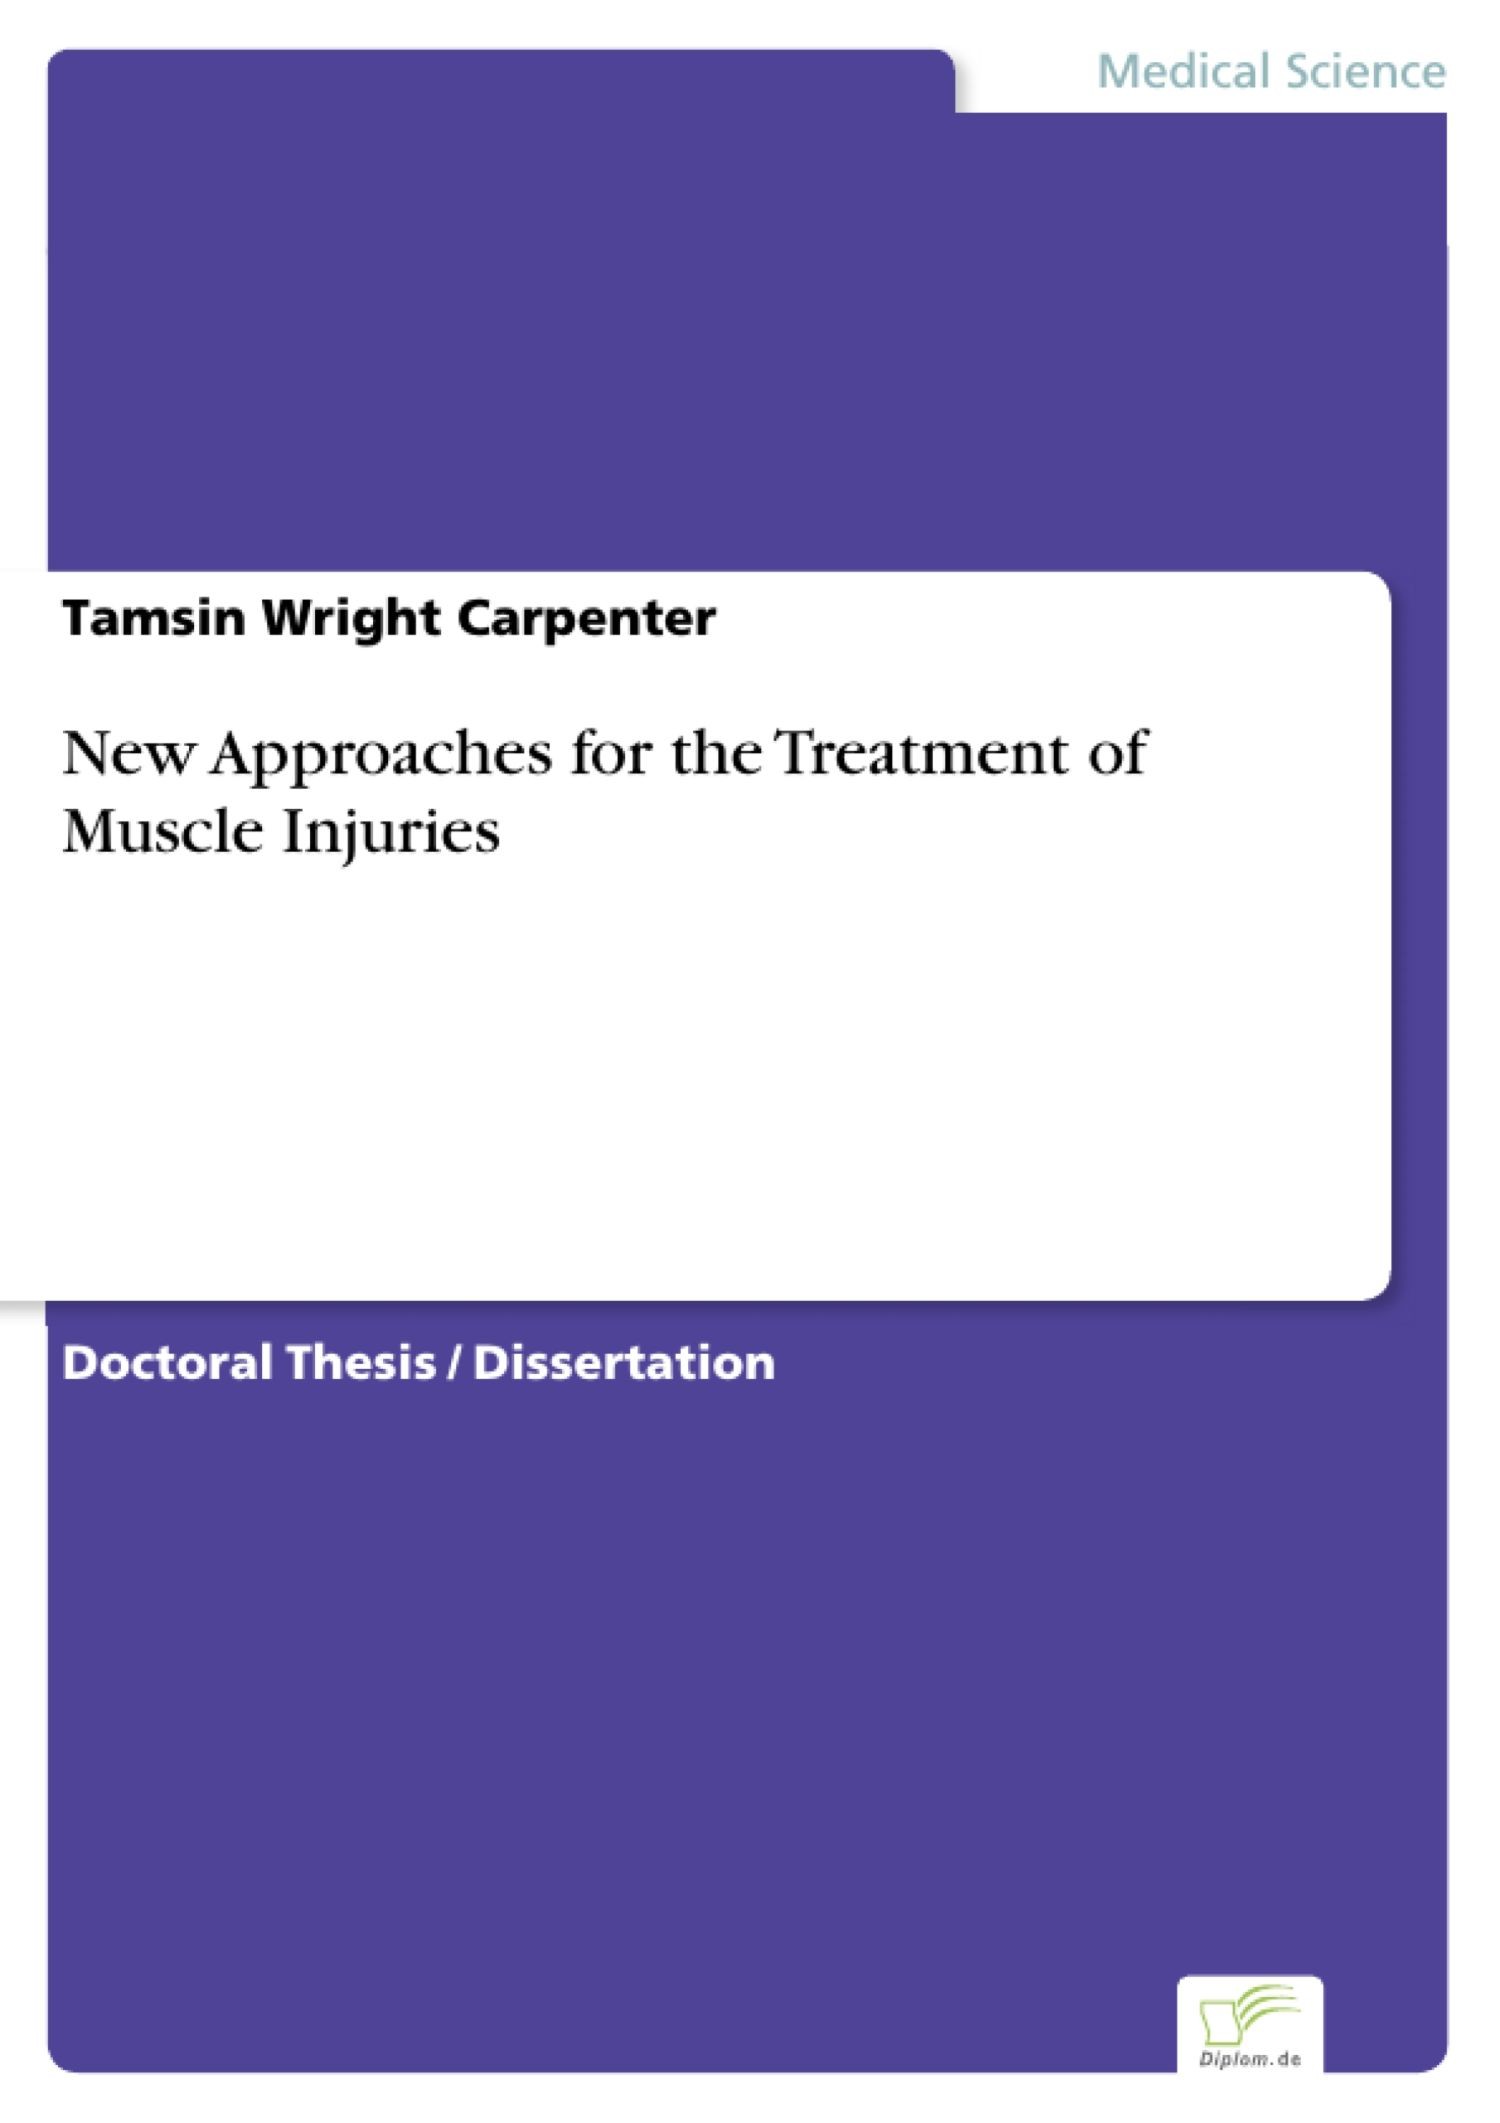 New Approaches for the Treatment of Muscle Injuries